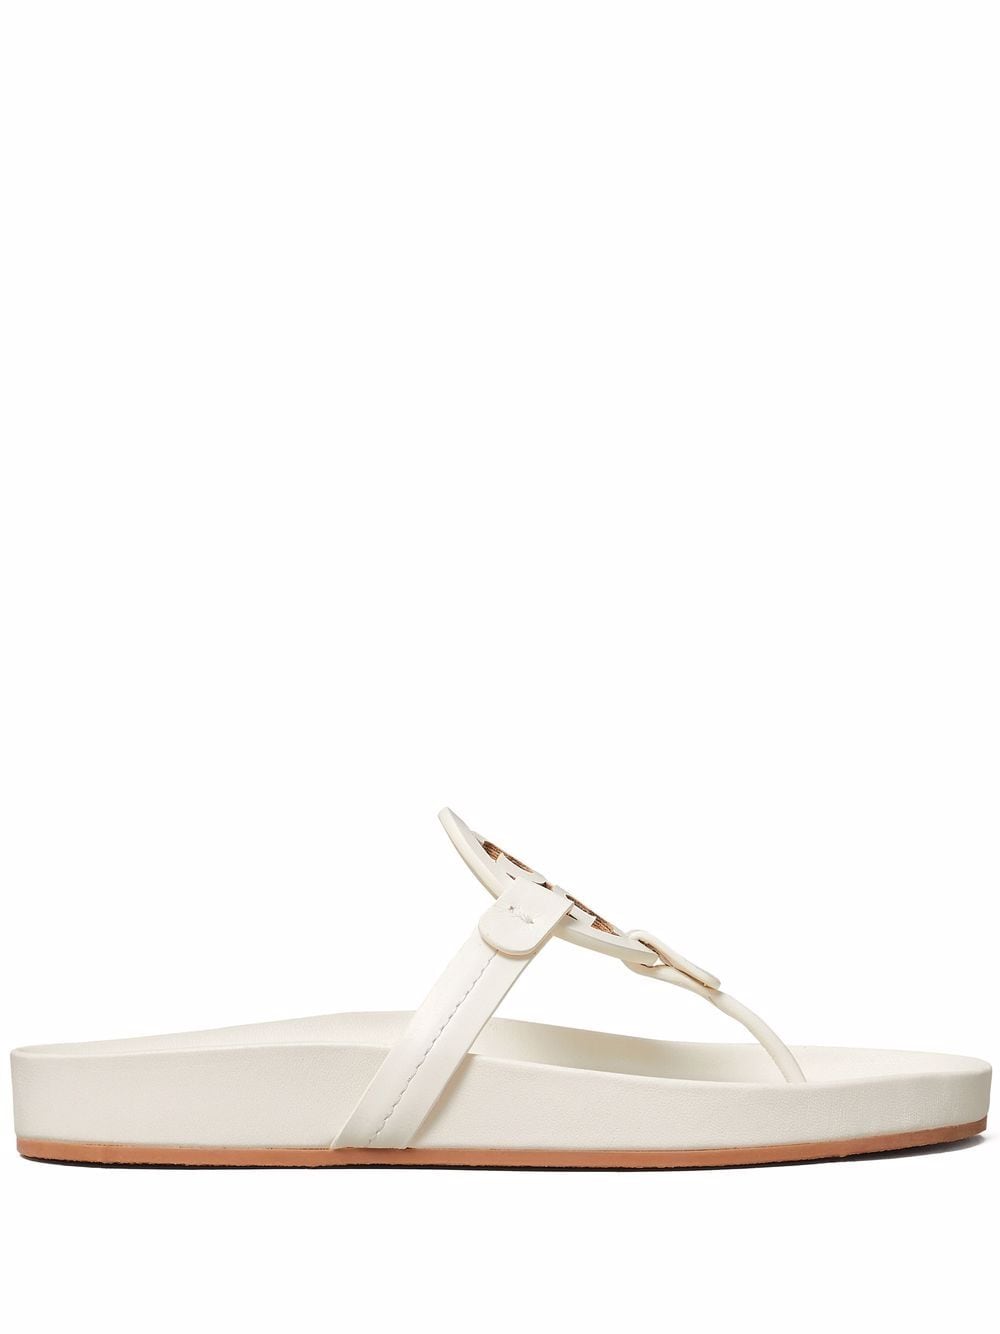 Tory Burch Miller Cloud leather sandals - White von Tory Burch